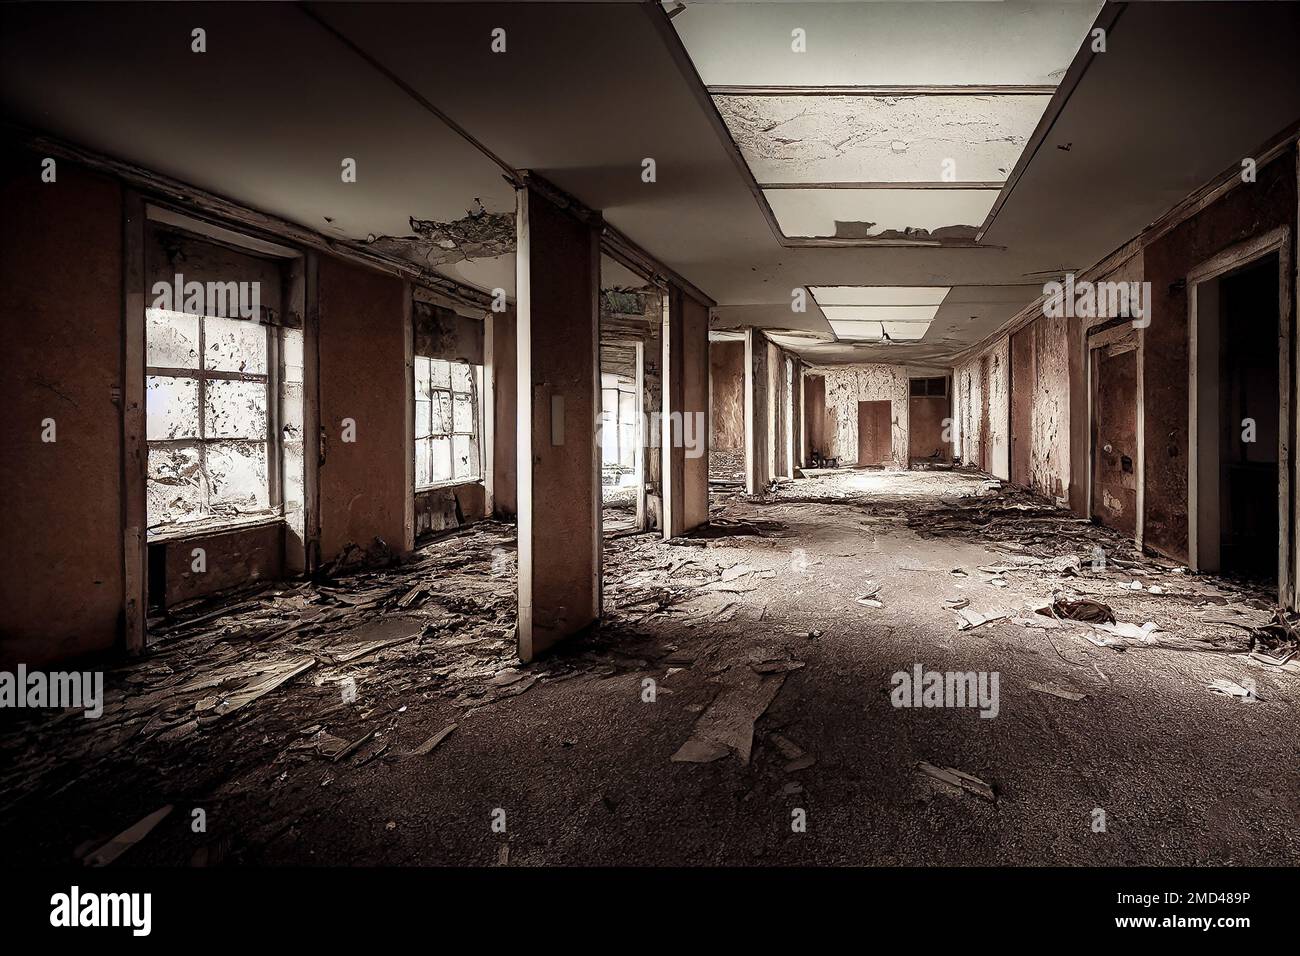 Mental hospital in ruins and abandoned Stock Photo